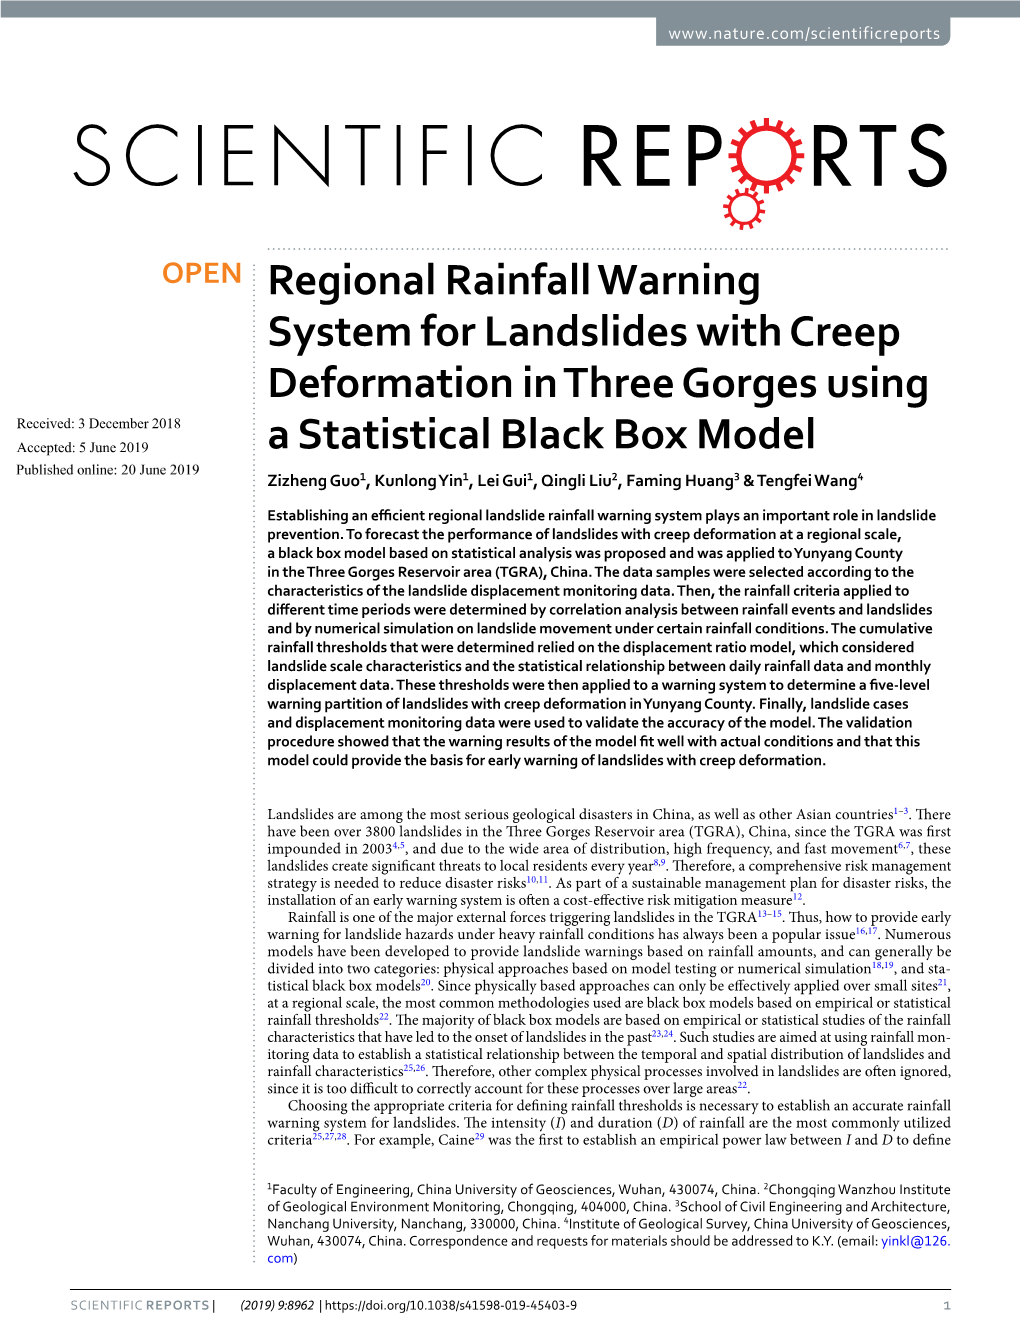 Regional Rainfall Warning System for Landslides with Creep Deformation in Three Gorges Using a Statistical Black Box Model